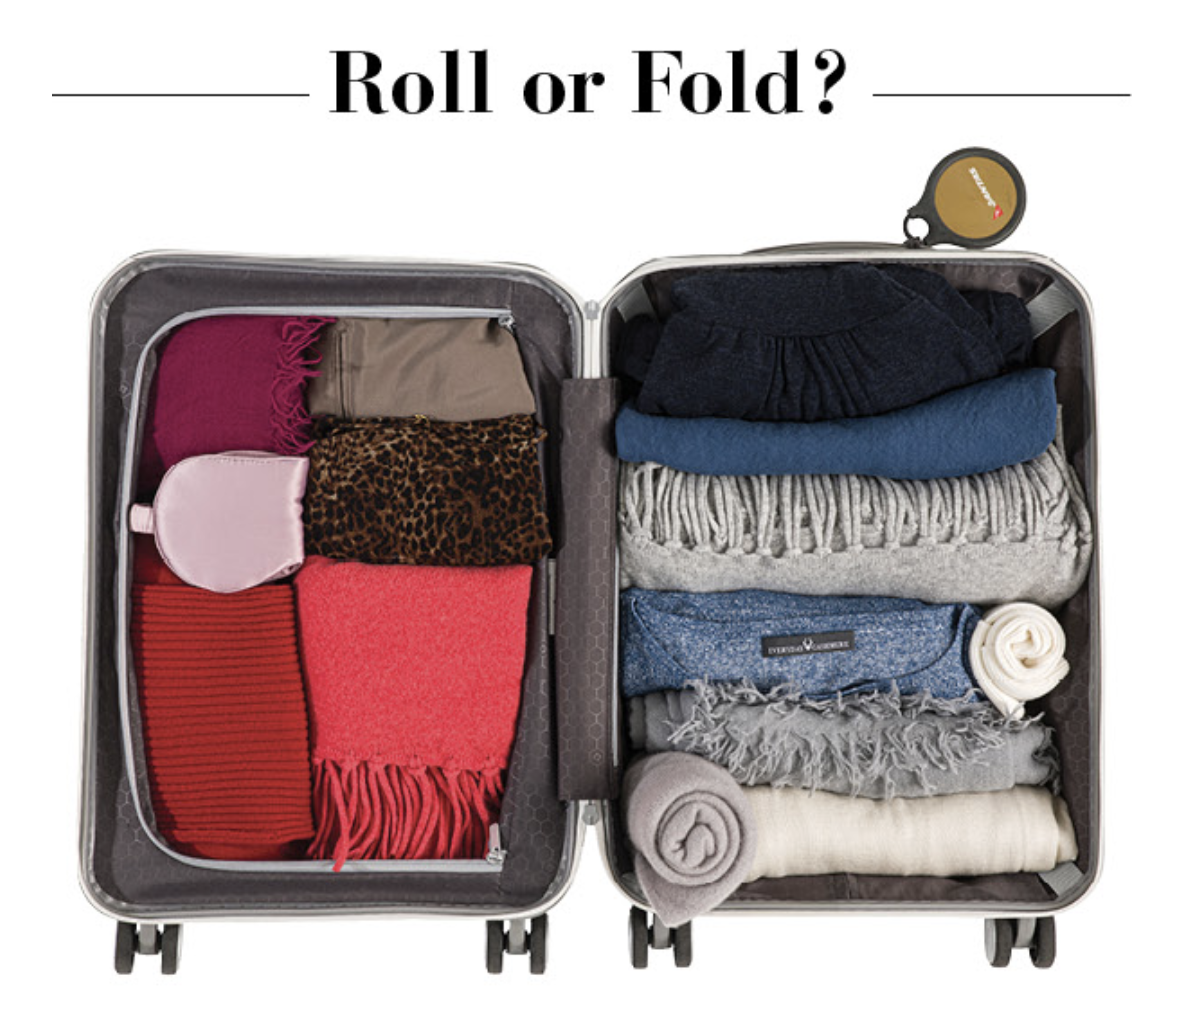 ROLL OR FOLD? 